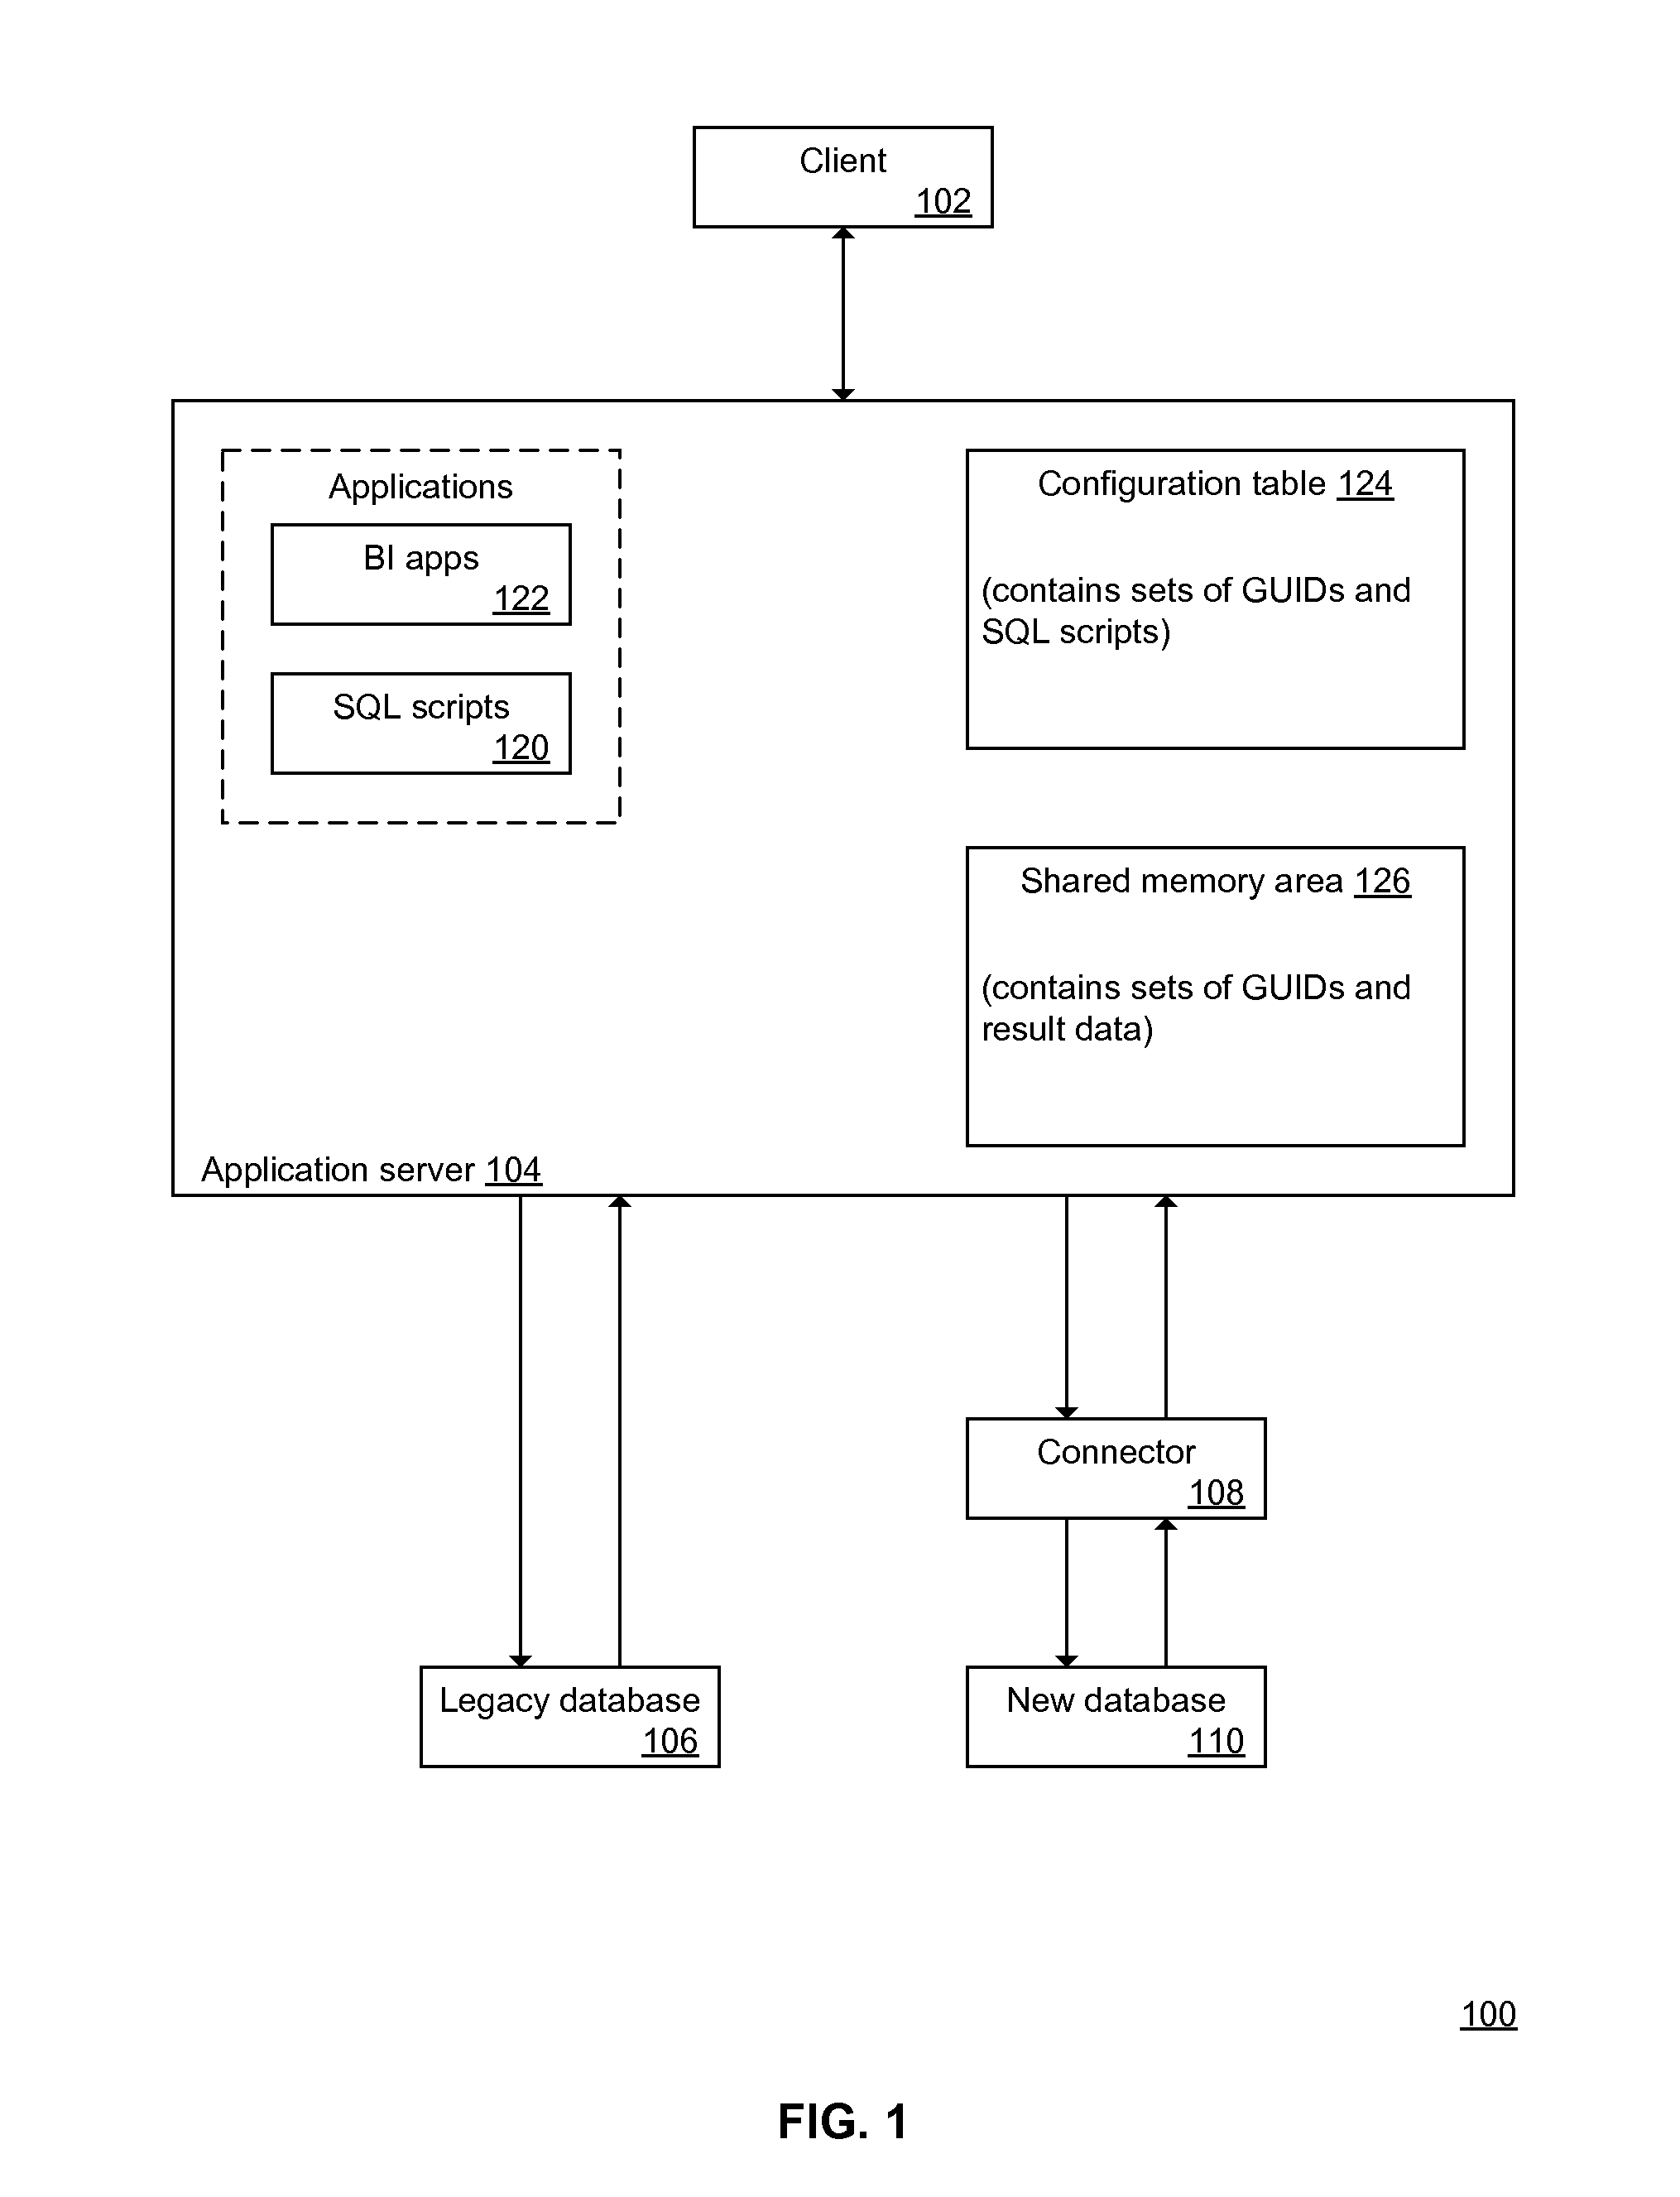 System and method of connecting legacy database applications and new database systems